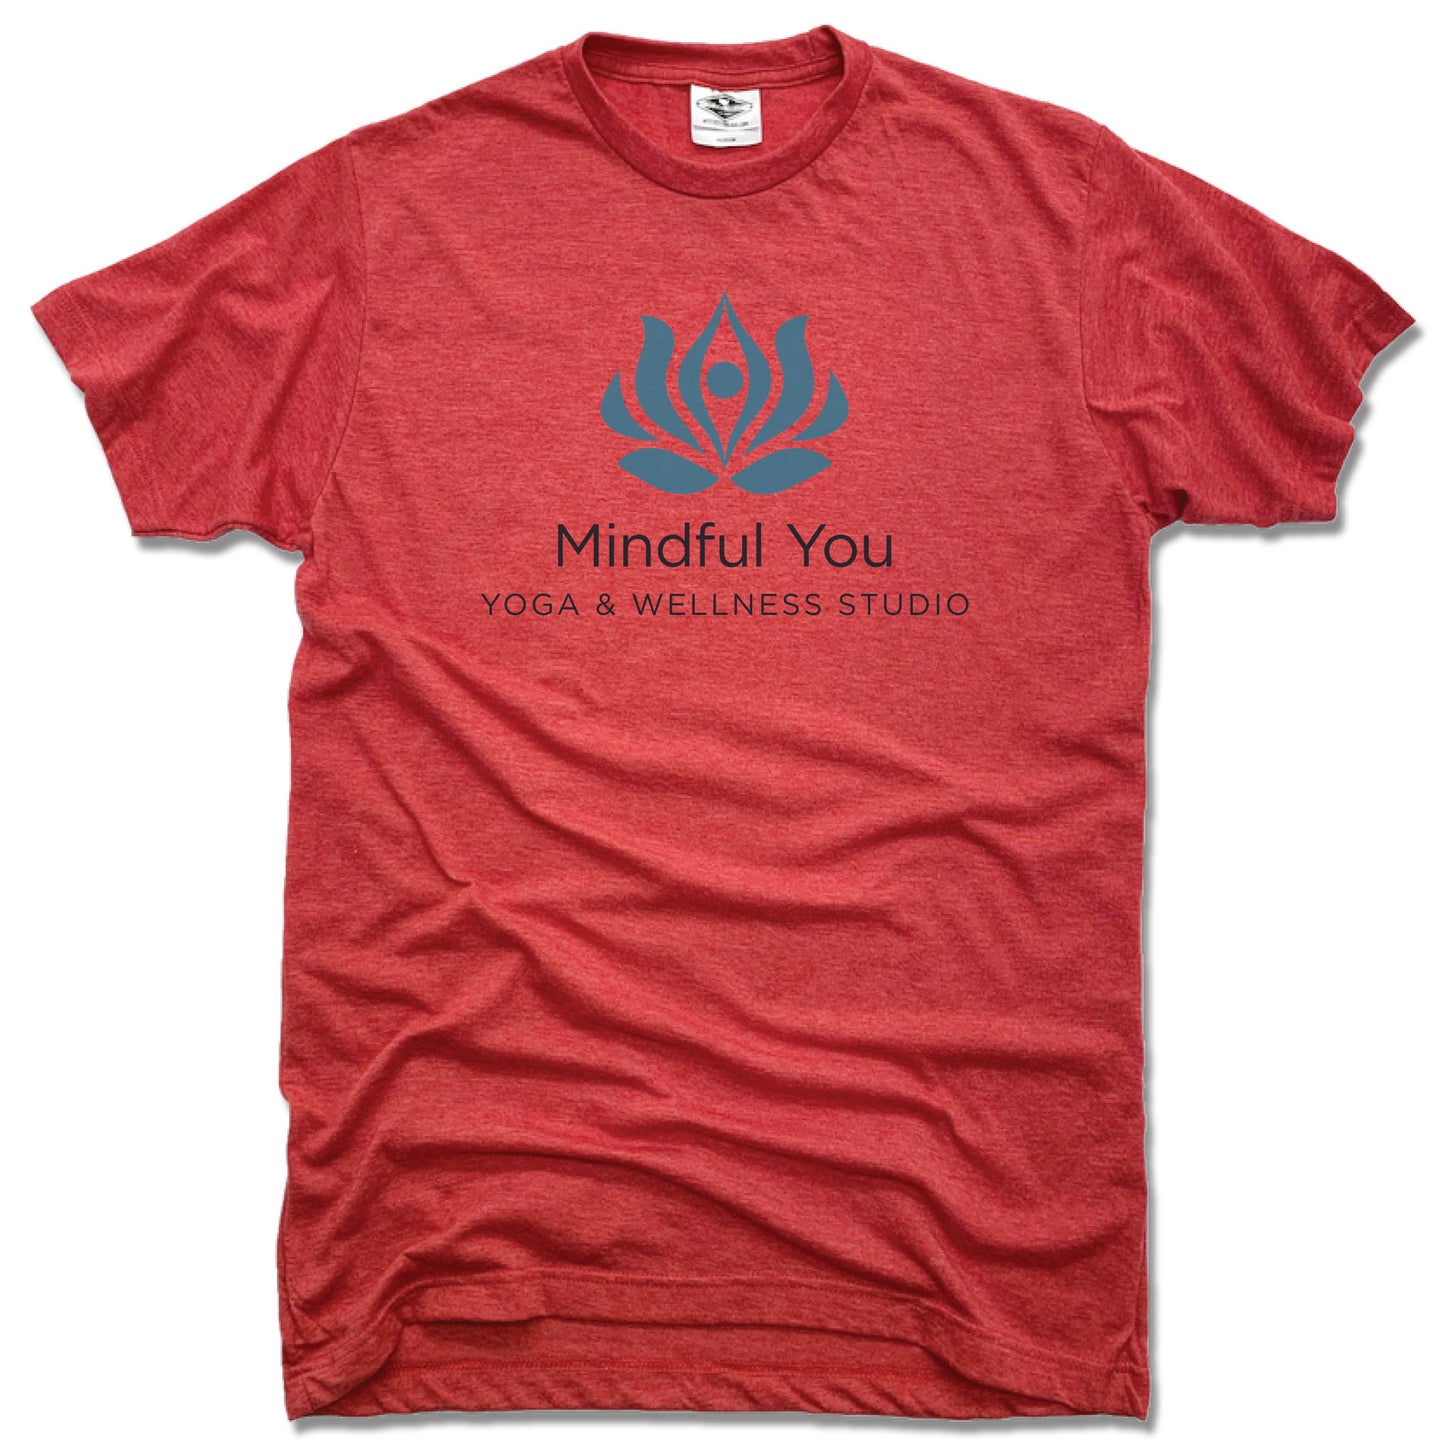 MINDFUL YOU YOGA & WELLNESS | UNISEX RED TEE | COLOR LOGO